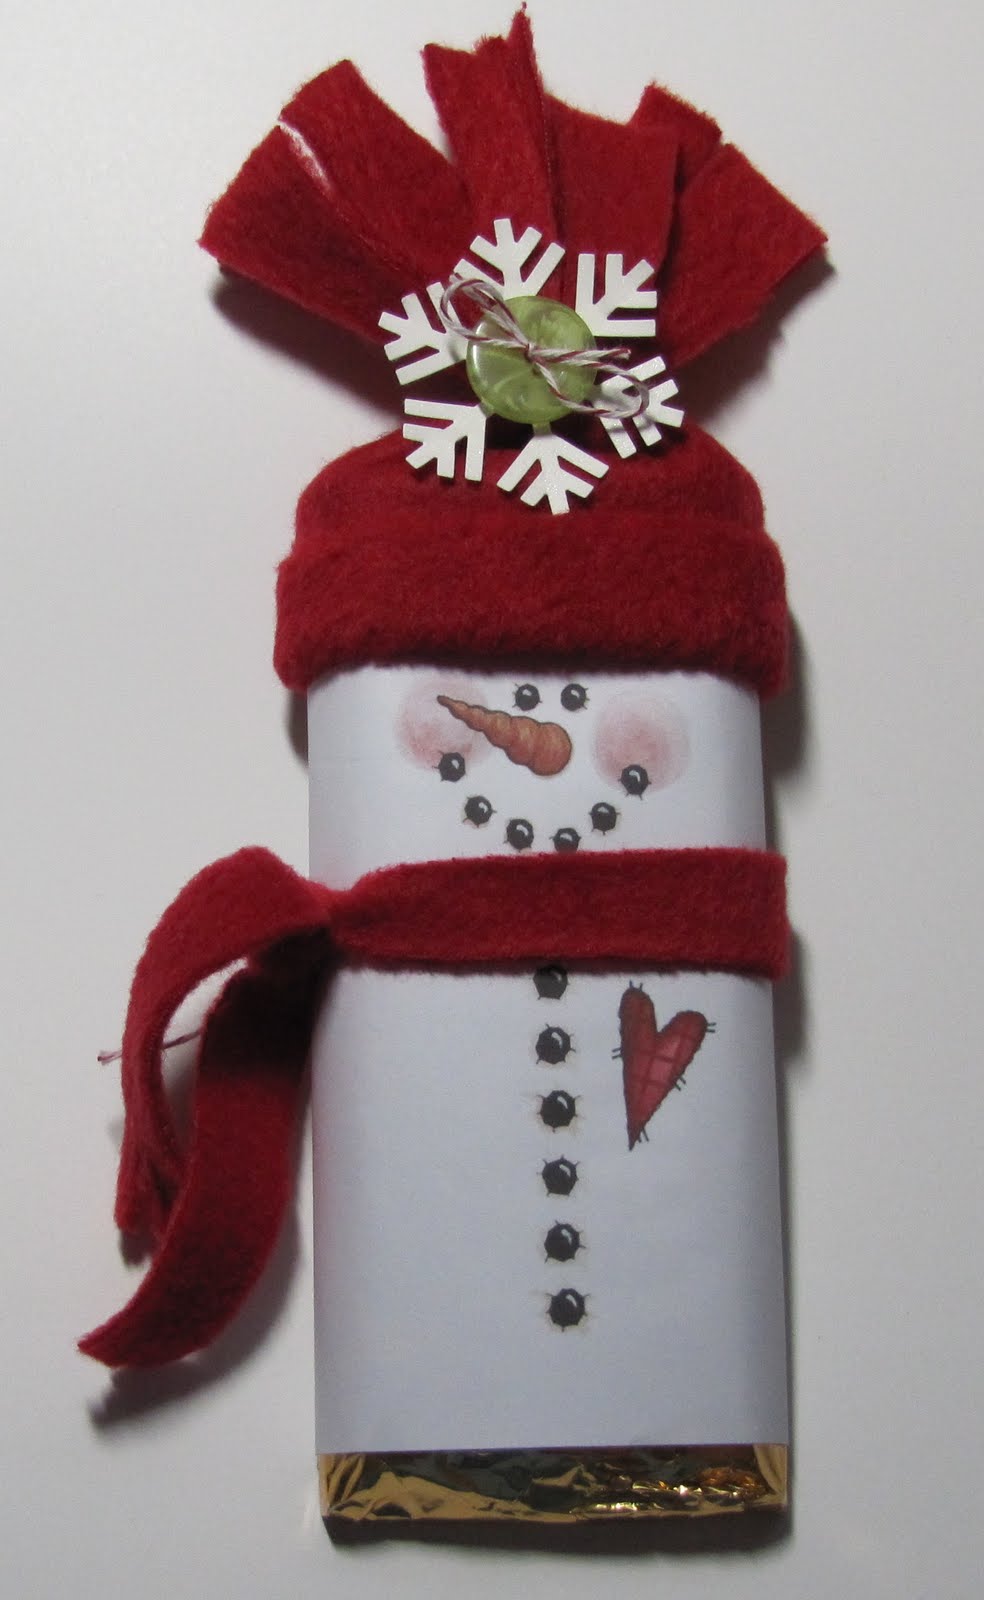 stamp-with-me-snowman-candy-bar-wrapper